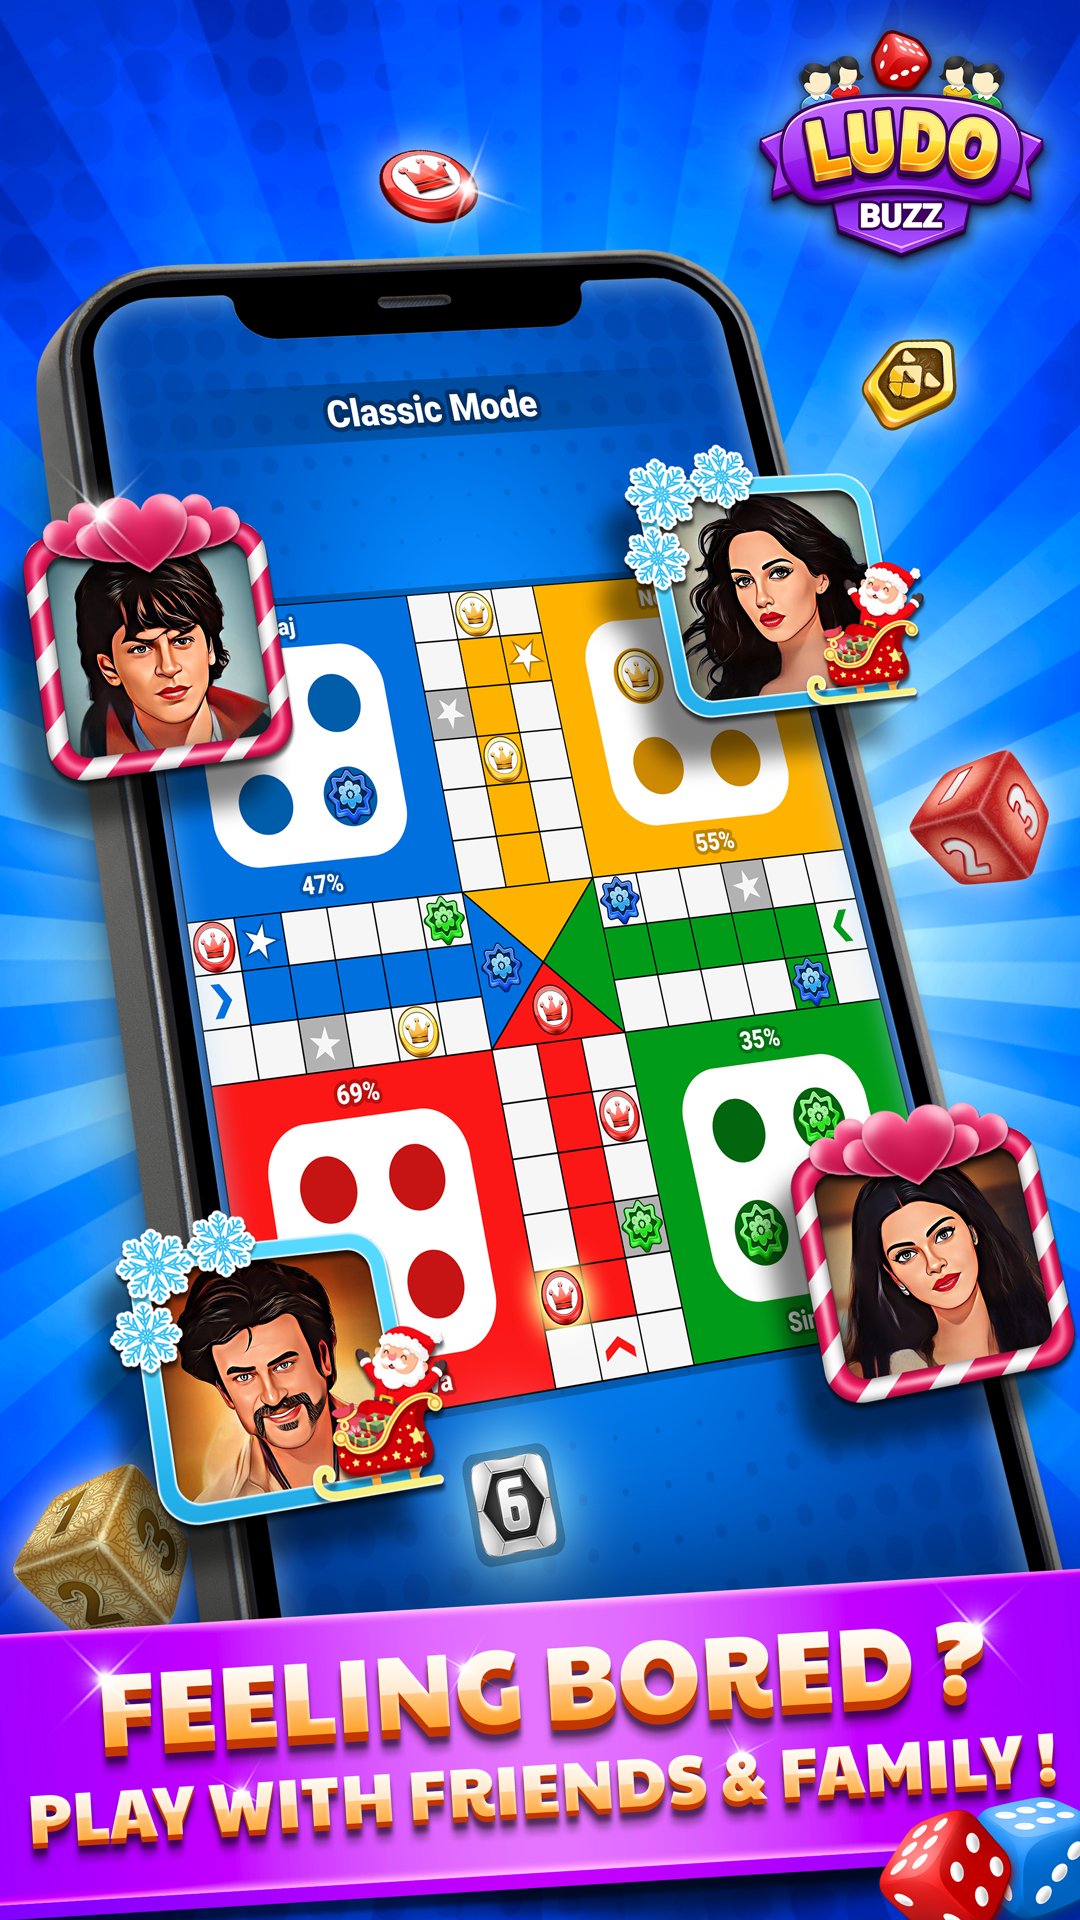 Download LUDO KING for PC - Play Best FREE Board Game Online